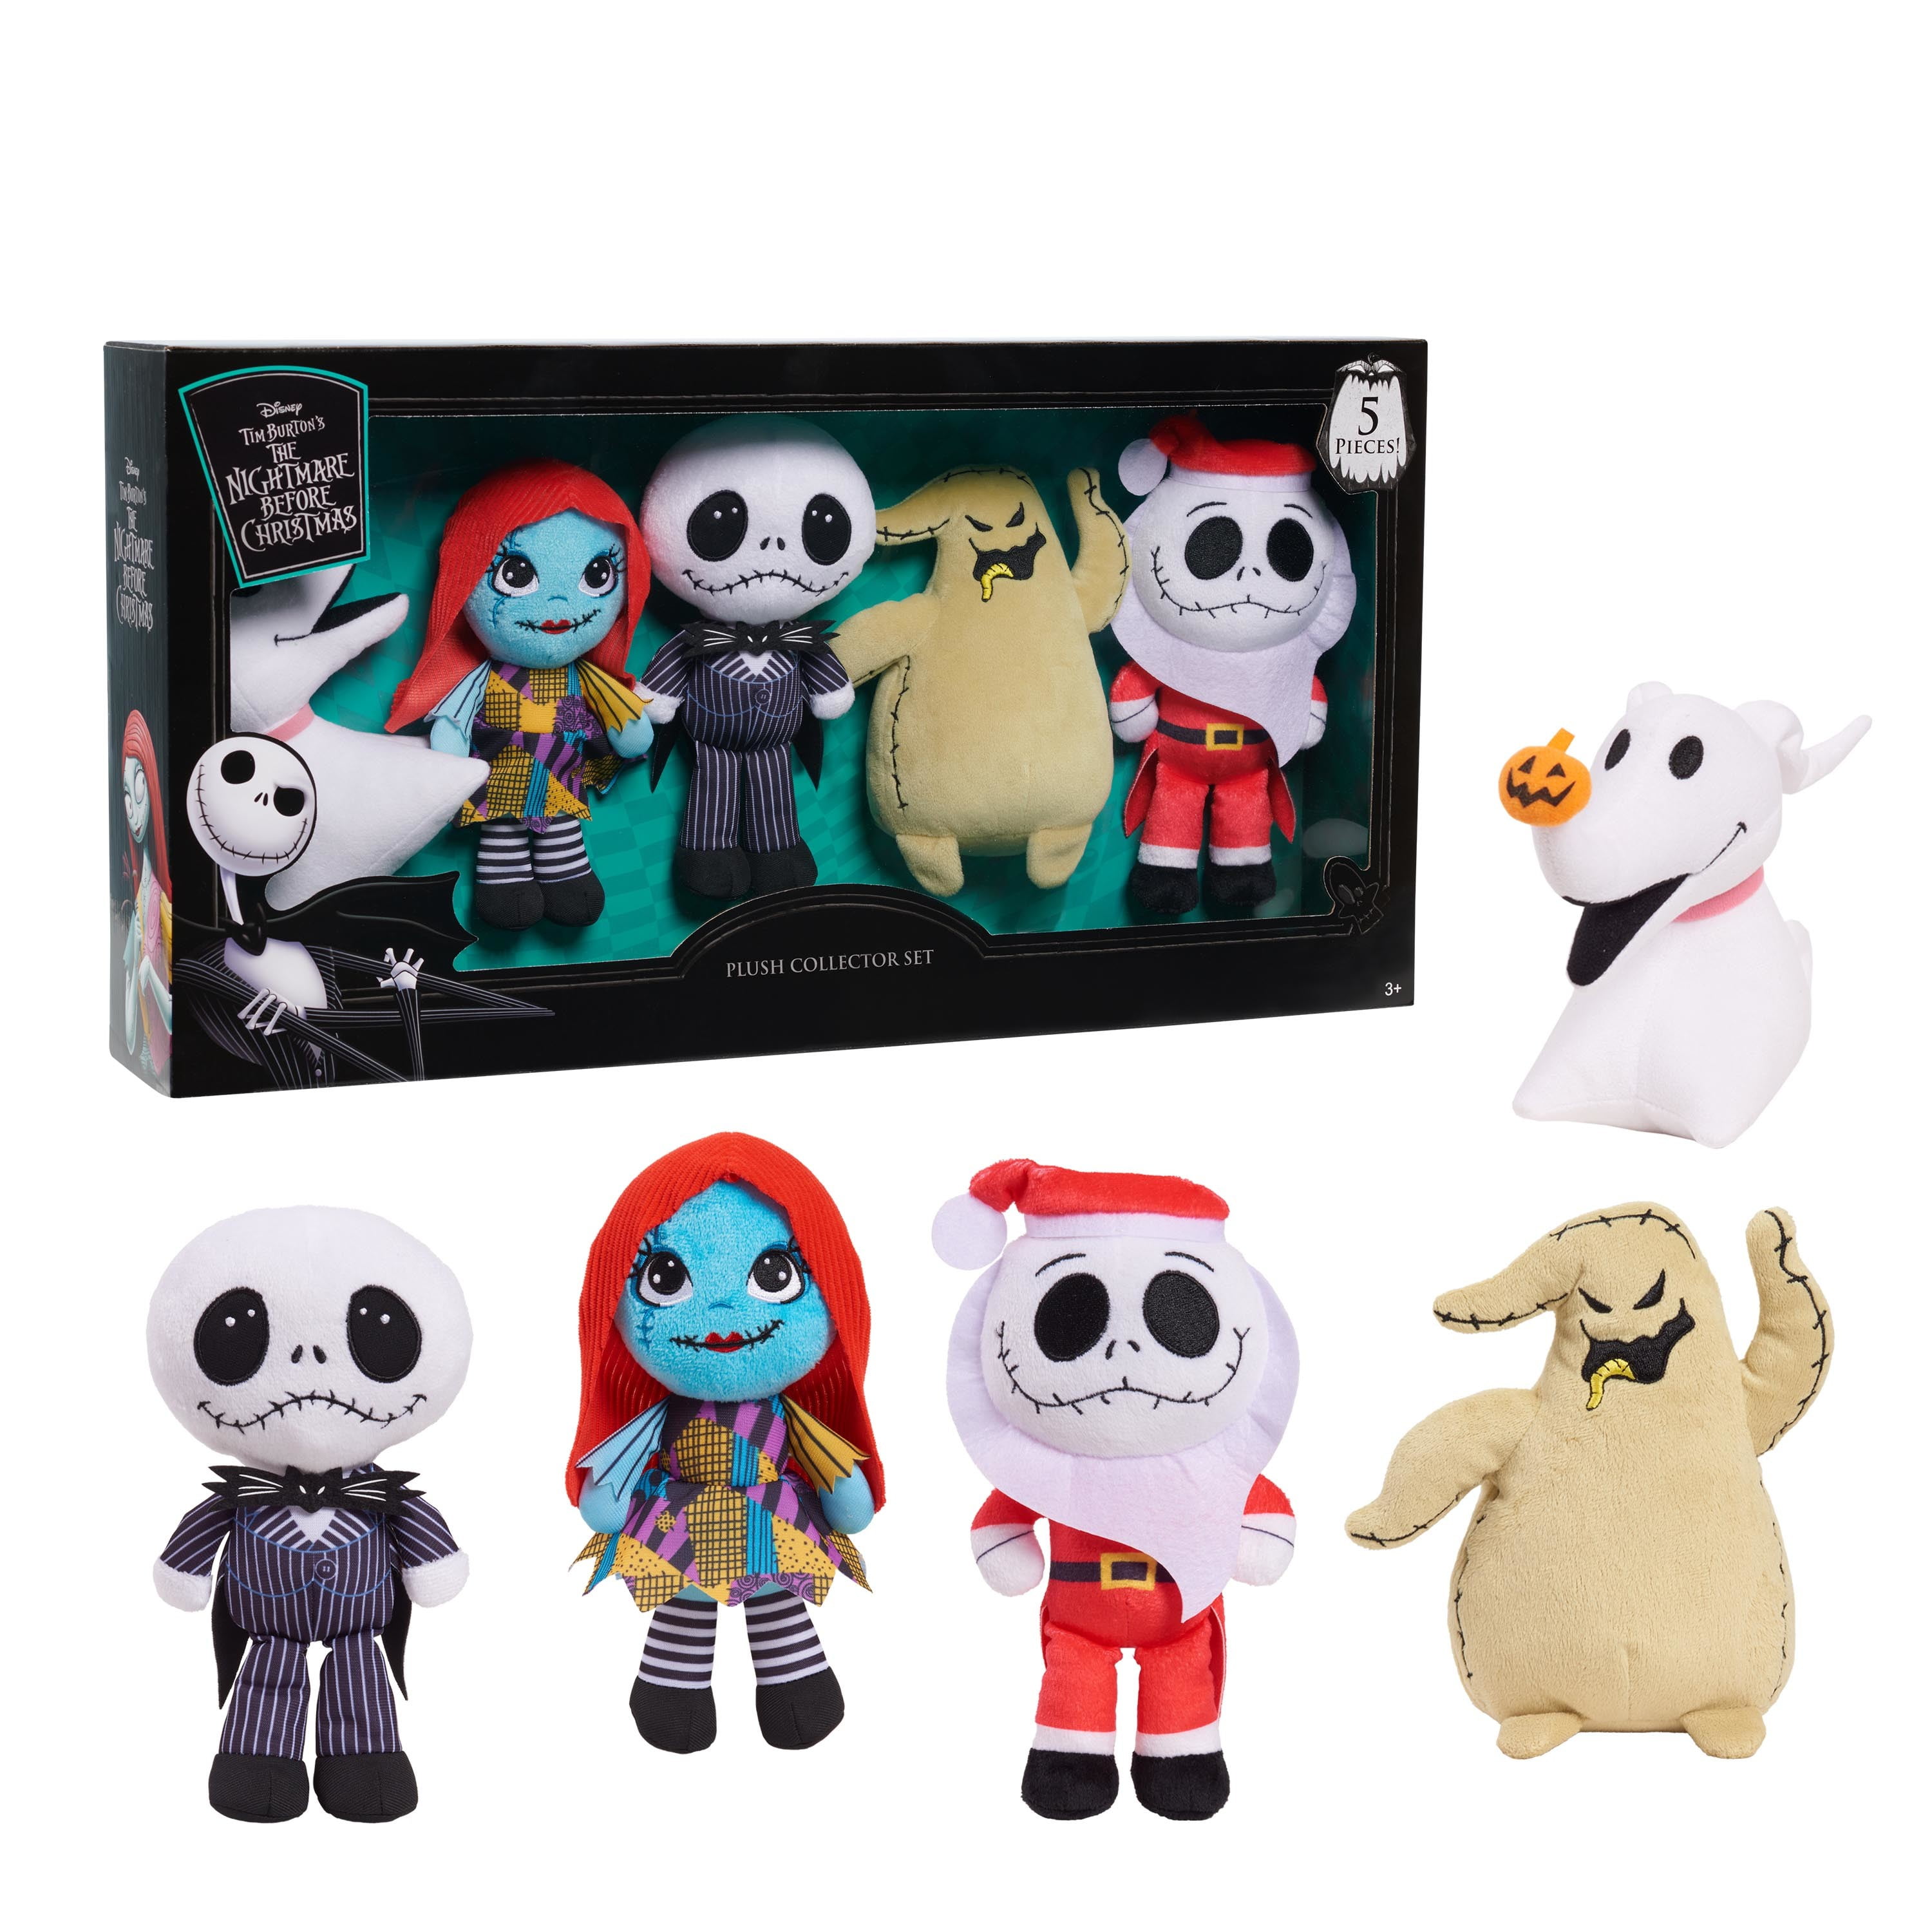 Tim Burton's The Nightmare Before Christmas Box Set, Officially Licensed Kids Toys for Ages 3 Gifts and Presents Walmart.com